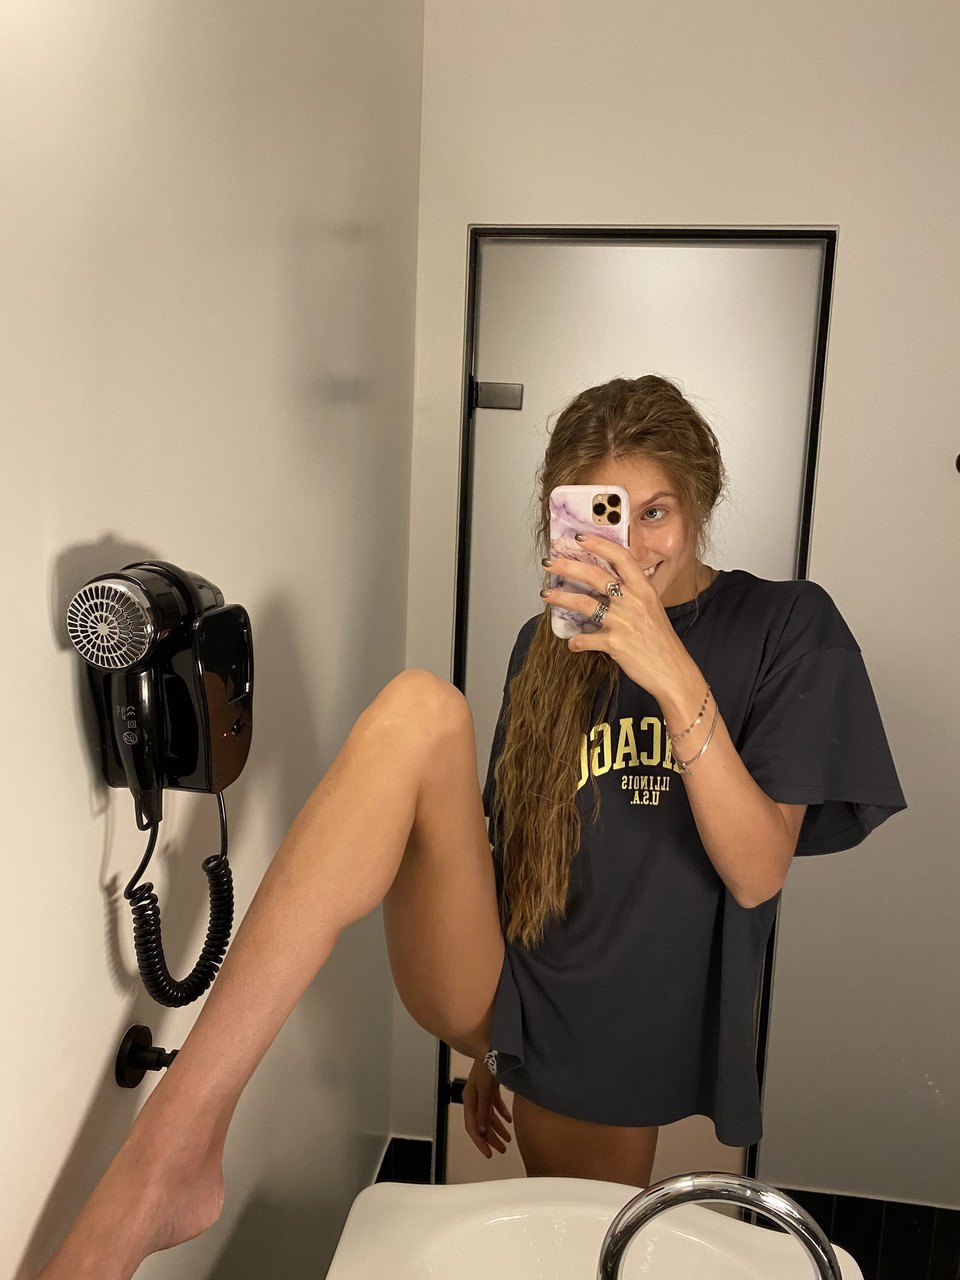 Skinny babe takes nude selfies showing her tiny tits and her tight ass porn photo #423874984 | OnlyFans JasminJass Pics, Homemade, mobile porn